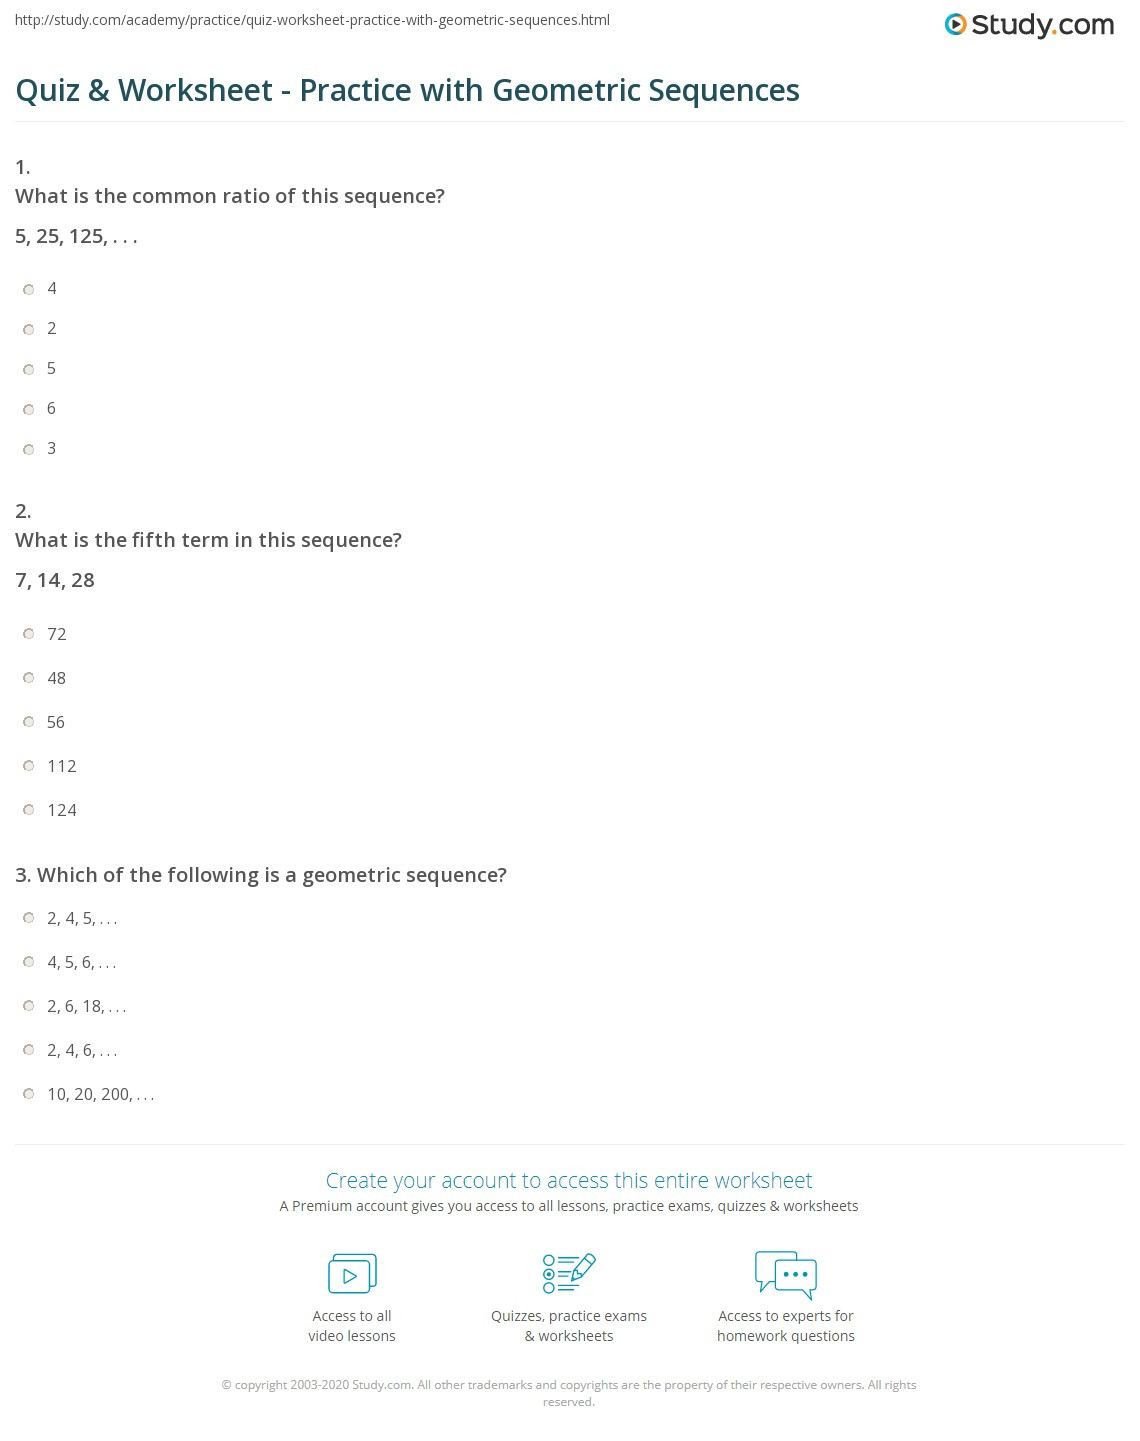 Arithmetic and Geometric Sequences Worksheet Quiz &amp; Worksheet Practice with Geometric Sequences